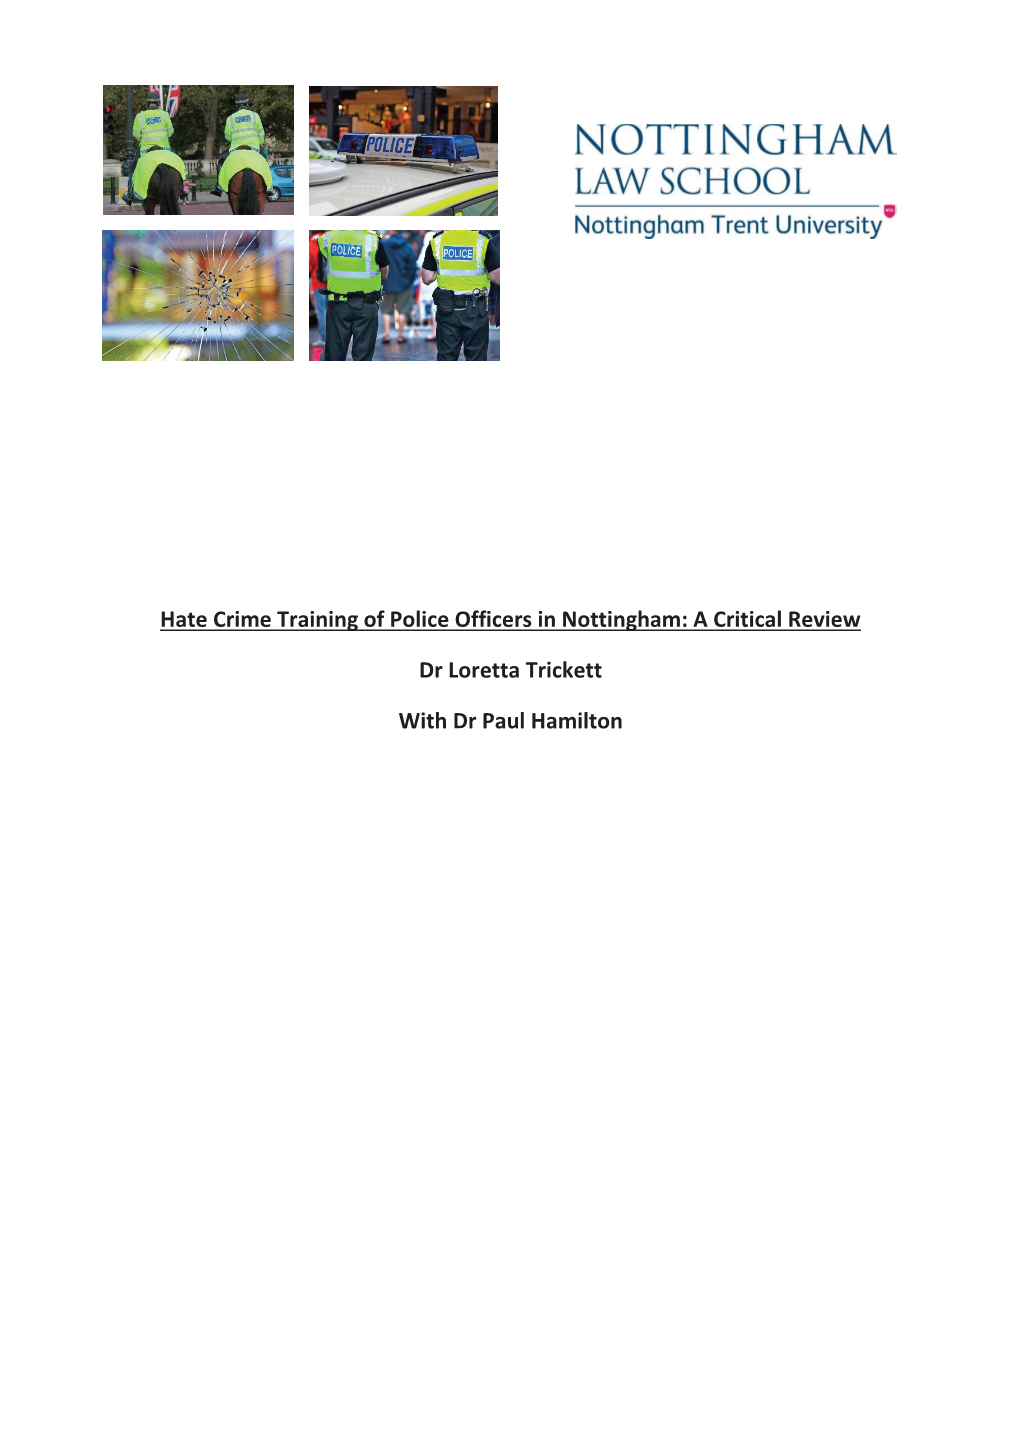 Hate Crime Training of Police Officers in Nottingham: a Critical Review Dr